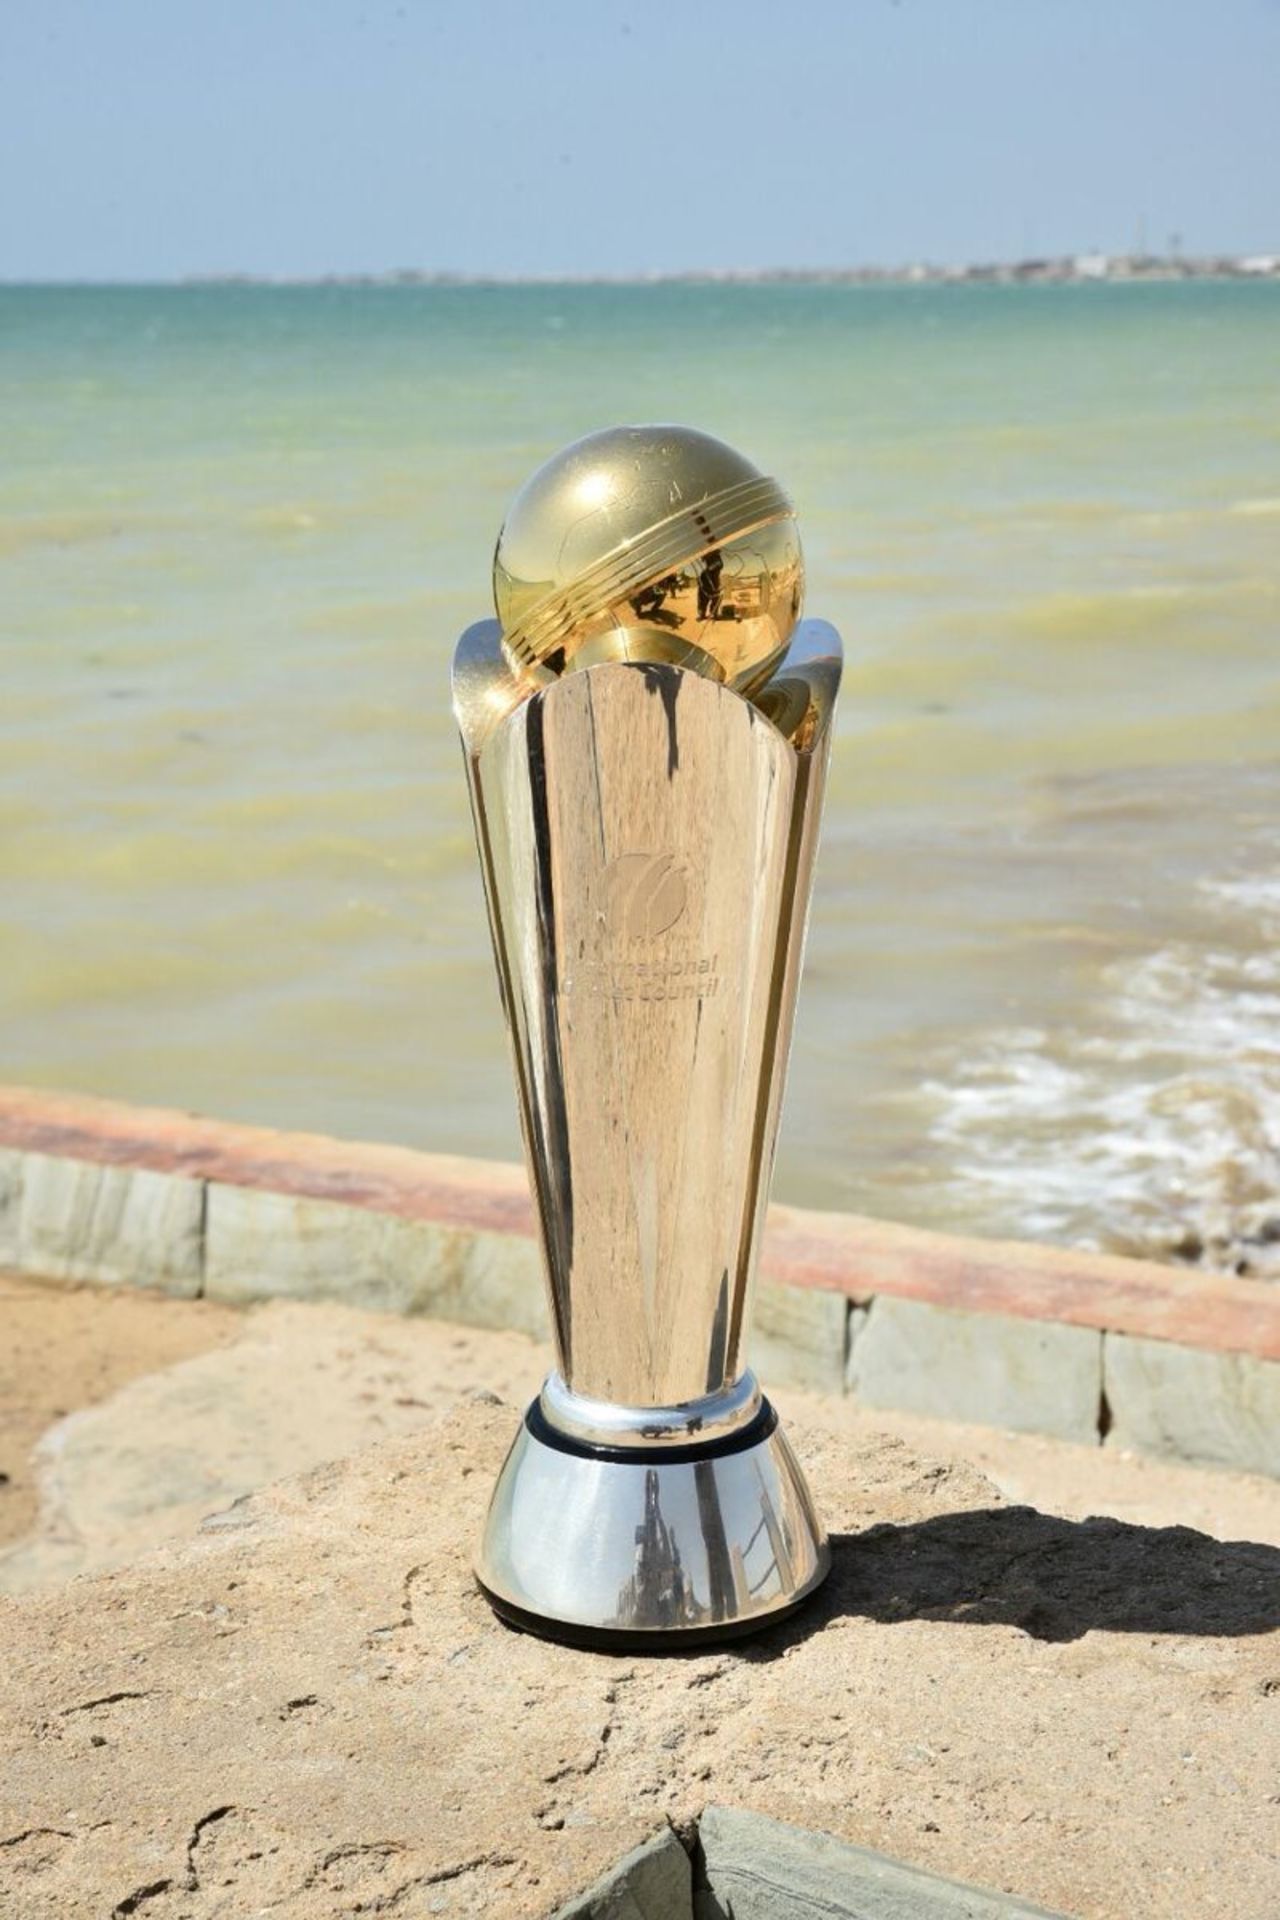 The ICC Champions Trophy arrived in Karachi, as part of its global tour of 19 cities across all eight competing nations, ICC Champions Trophy 2017, Karachi, March 30, 2017